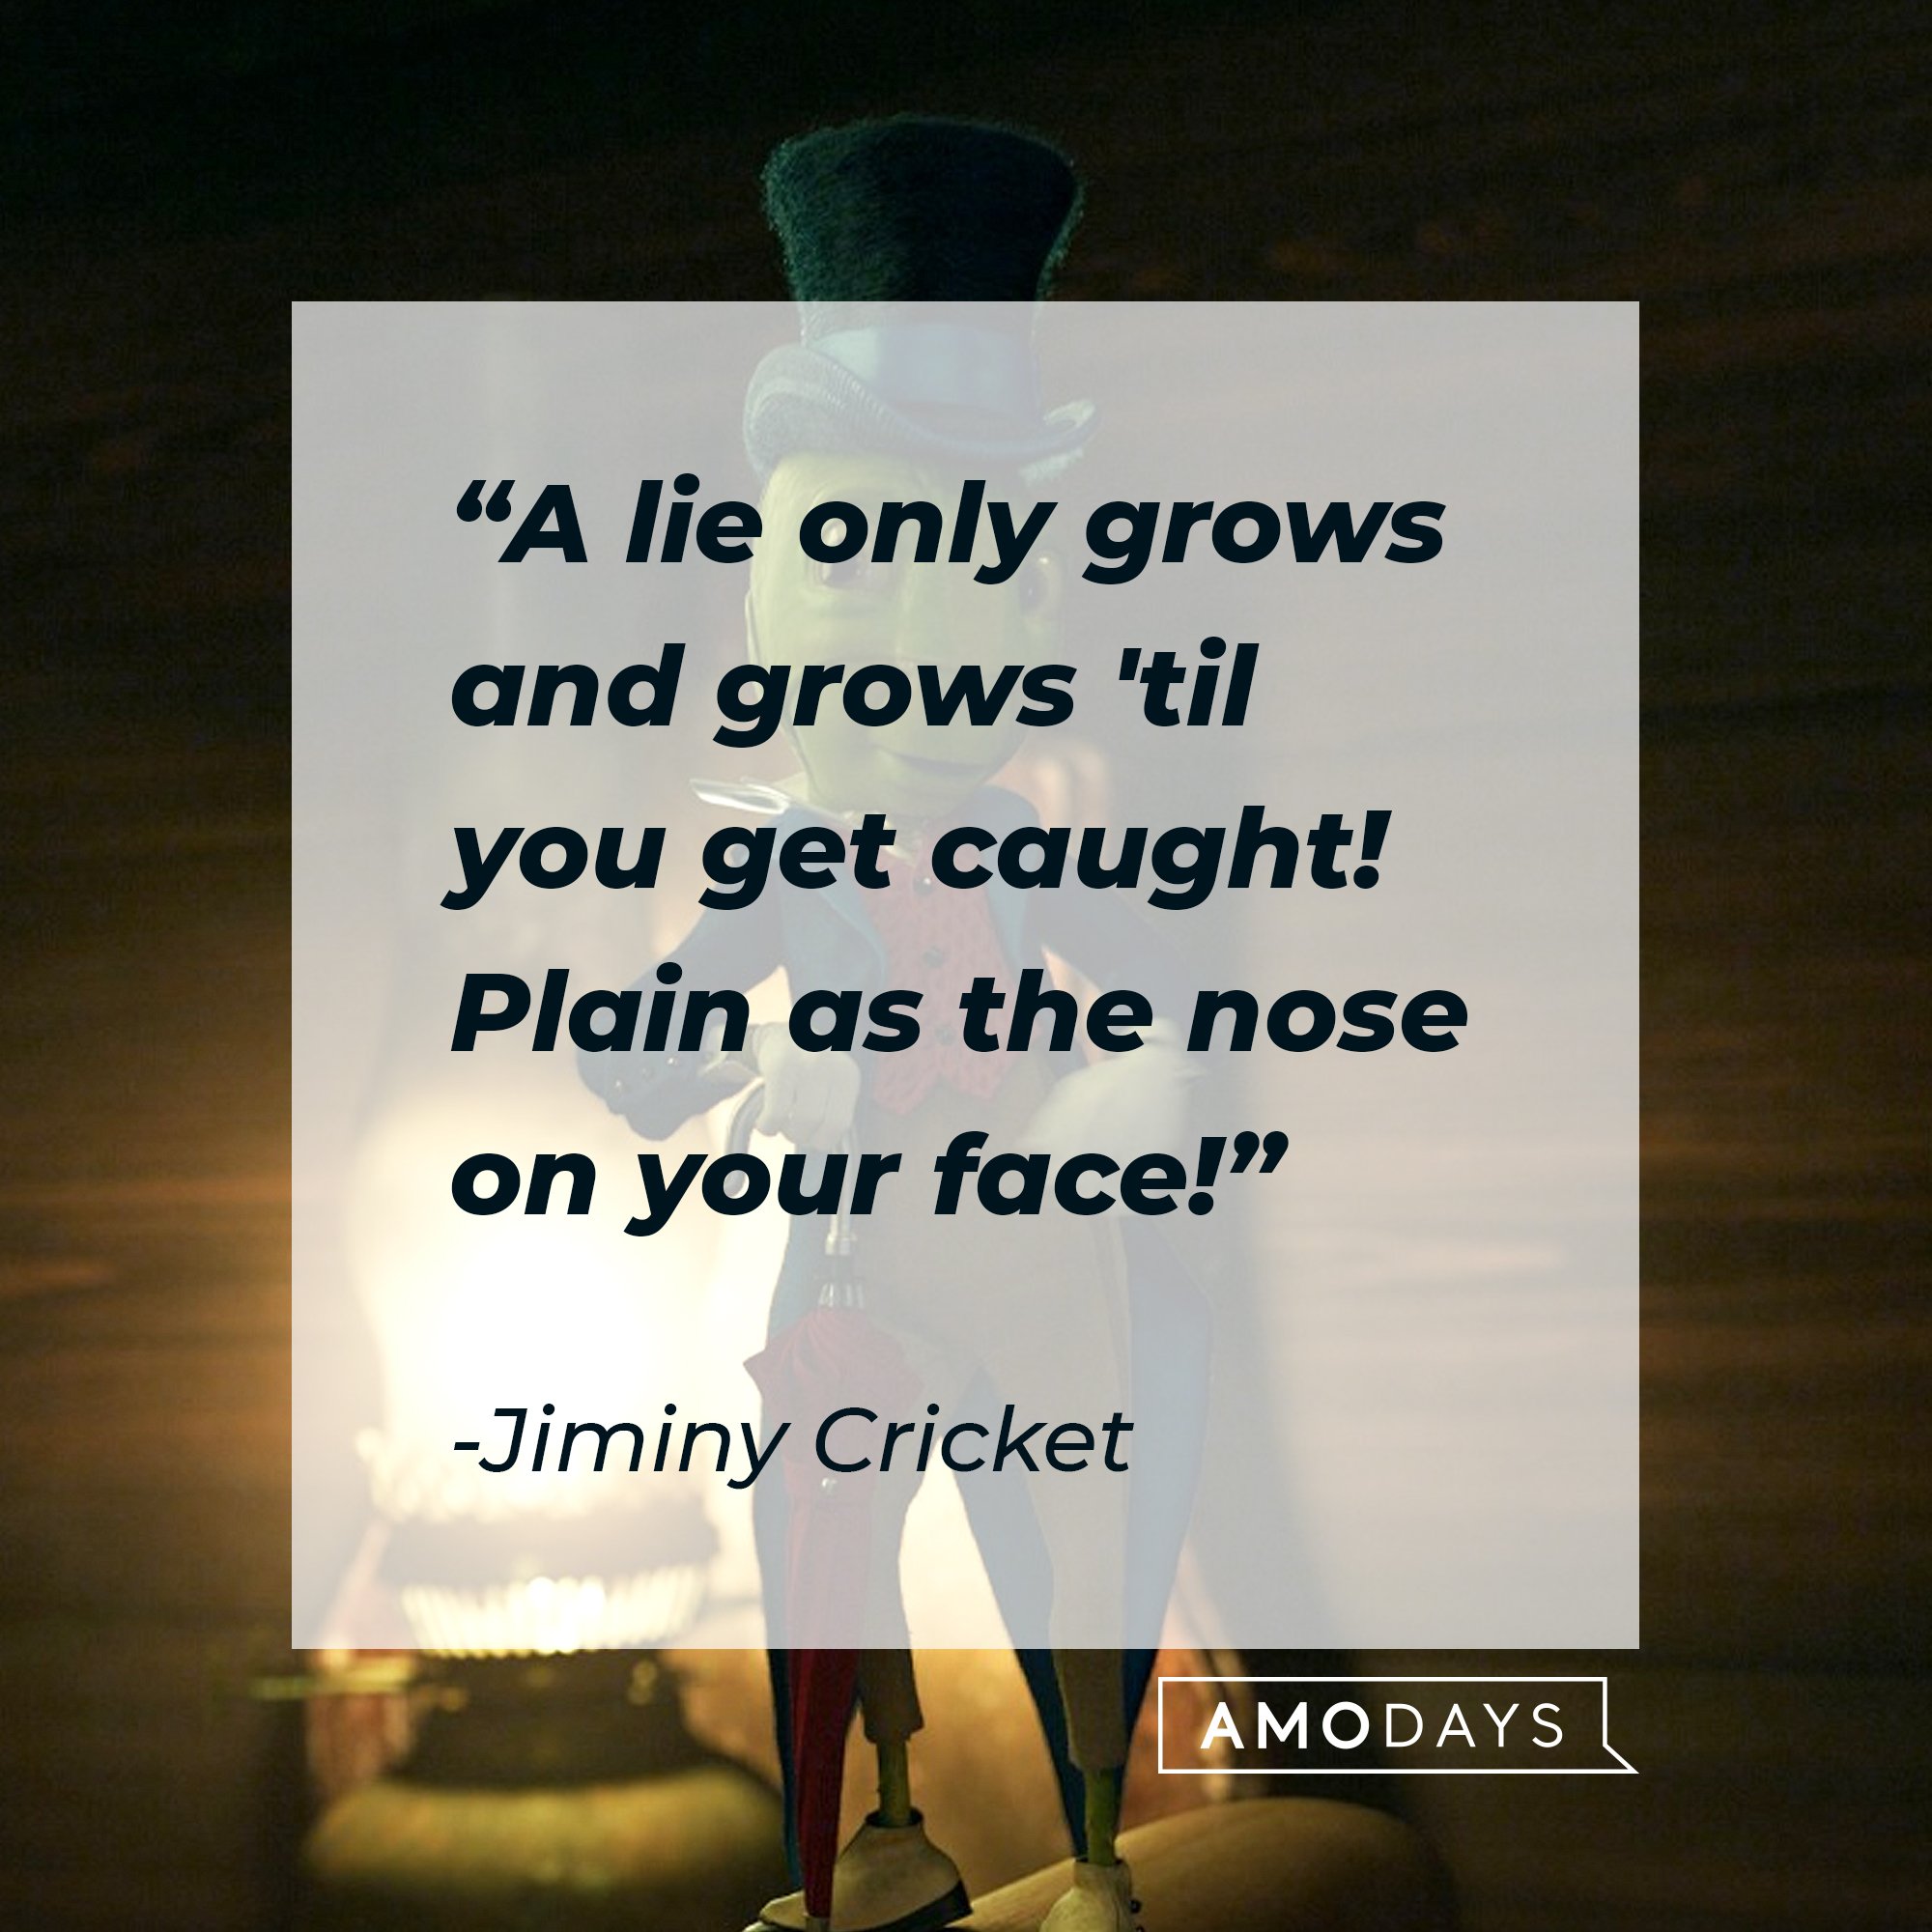  Jiminy Cricket's quote: "A lie only grows and grows 'til you get caught! Plain as the nose on your face!" |  Image: AmoDays